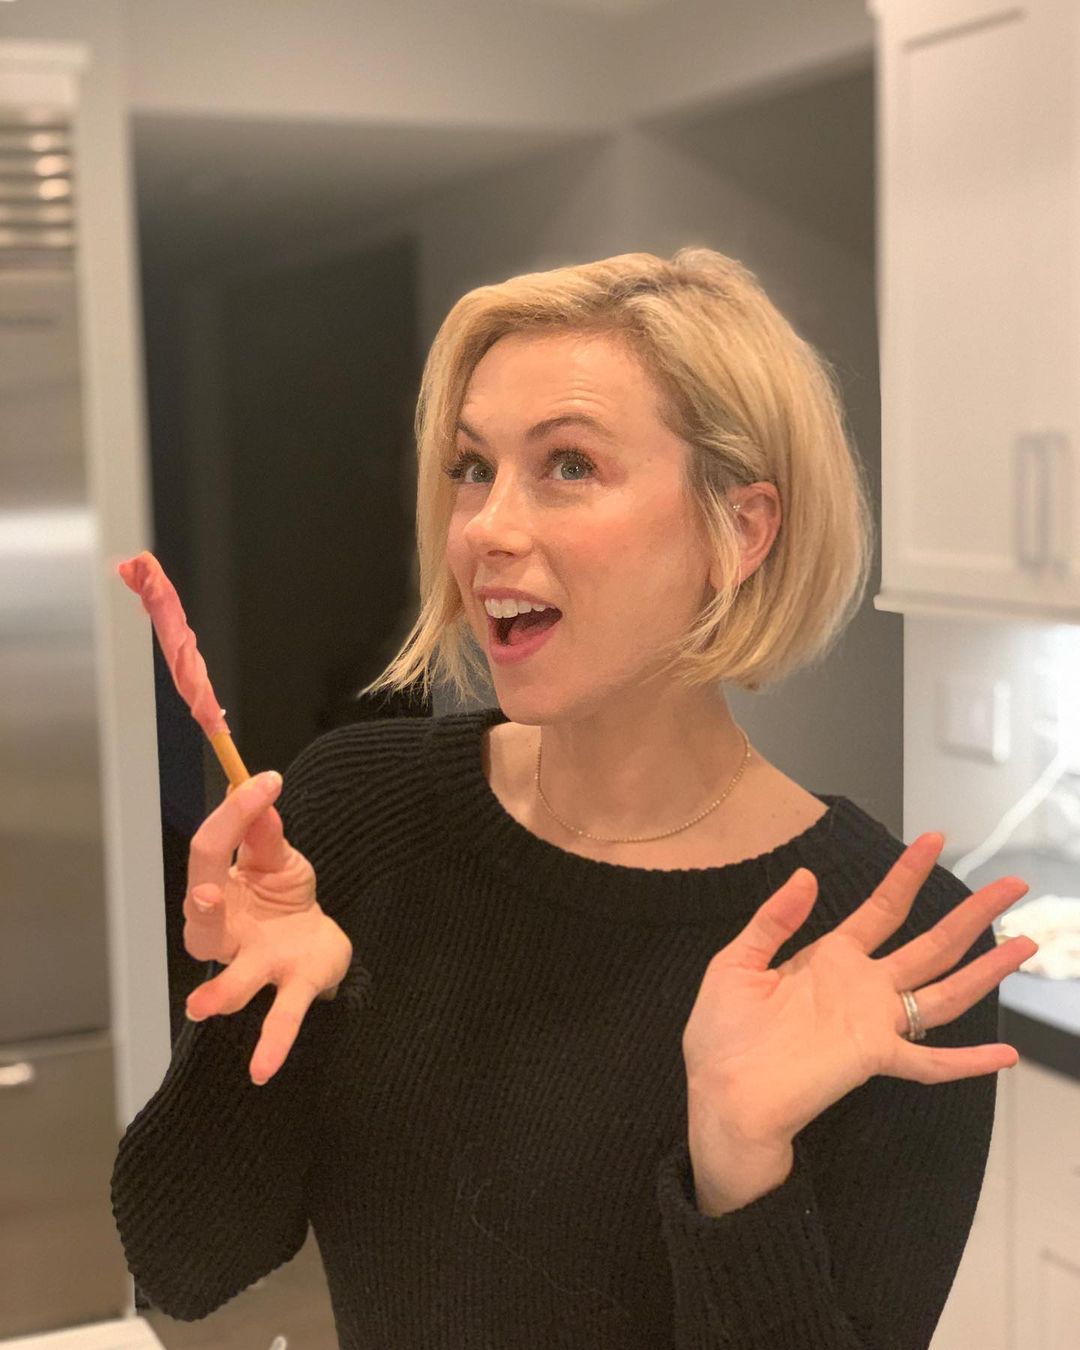 Iliza Shlesinger holds a breadstick wrapped in prosciutto or uncooked, dry-cured ham